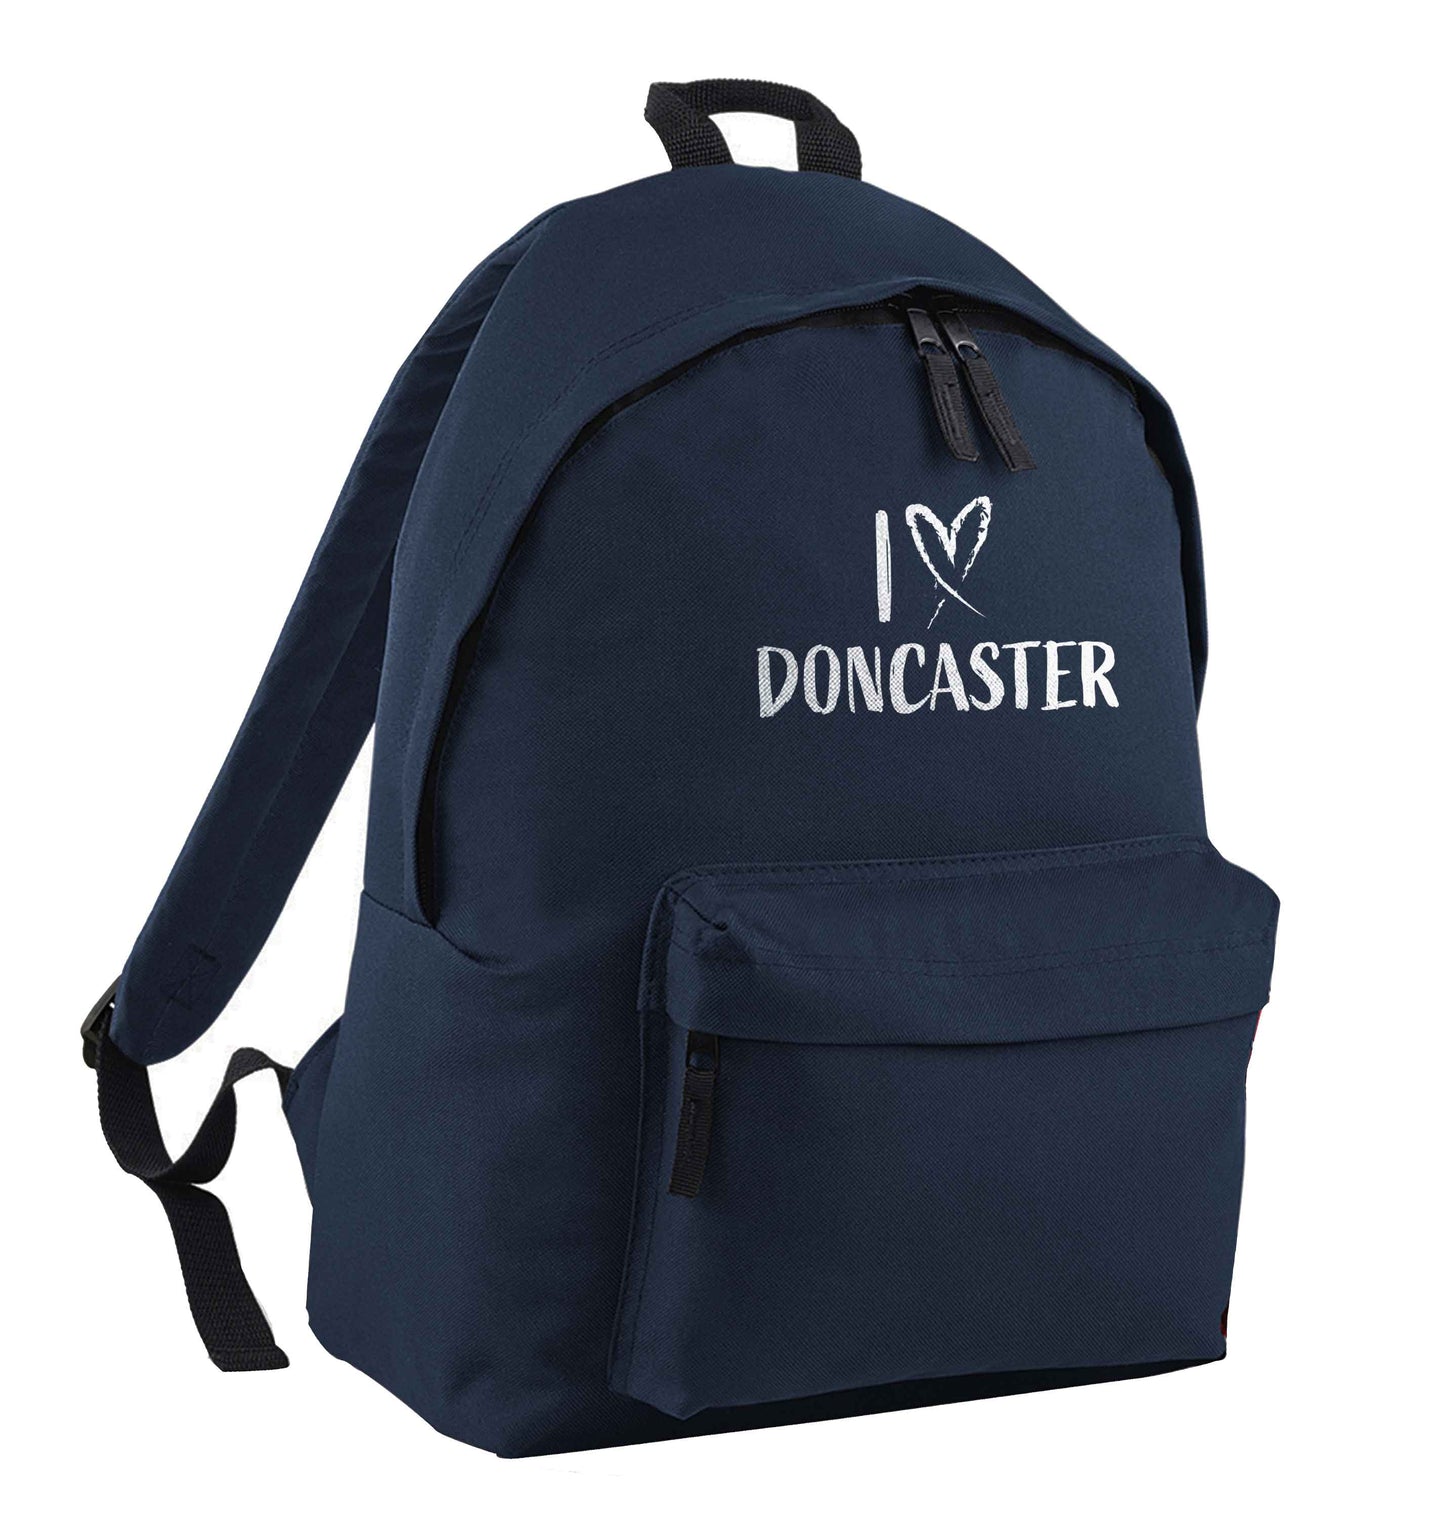 I love Doncaster navy adults backpack